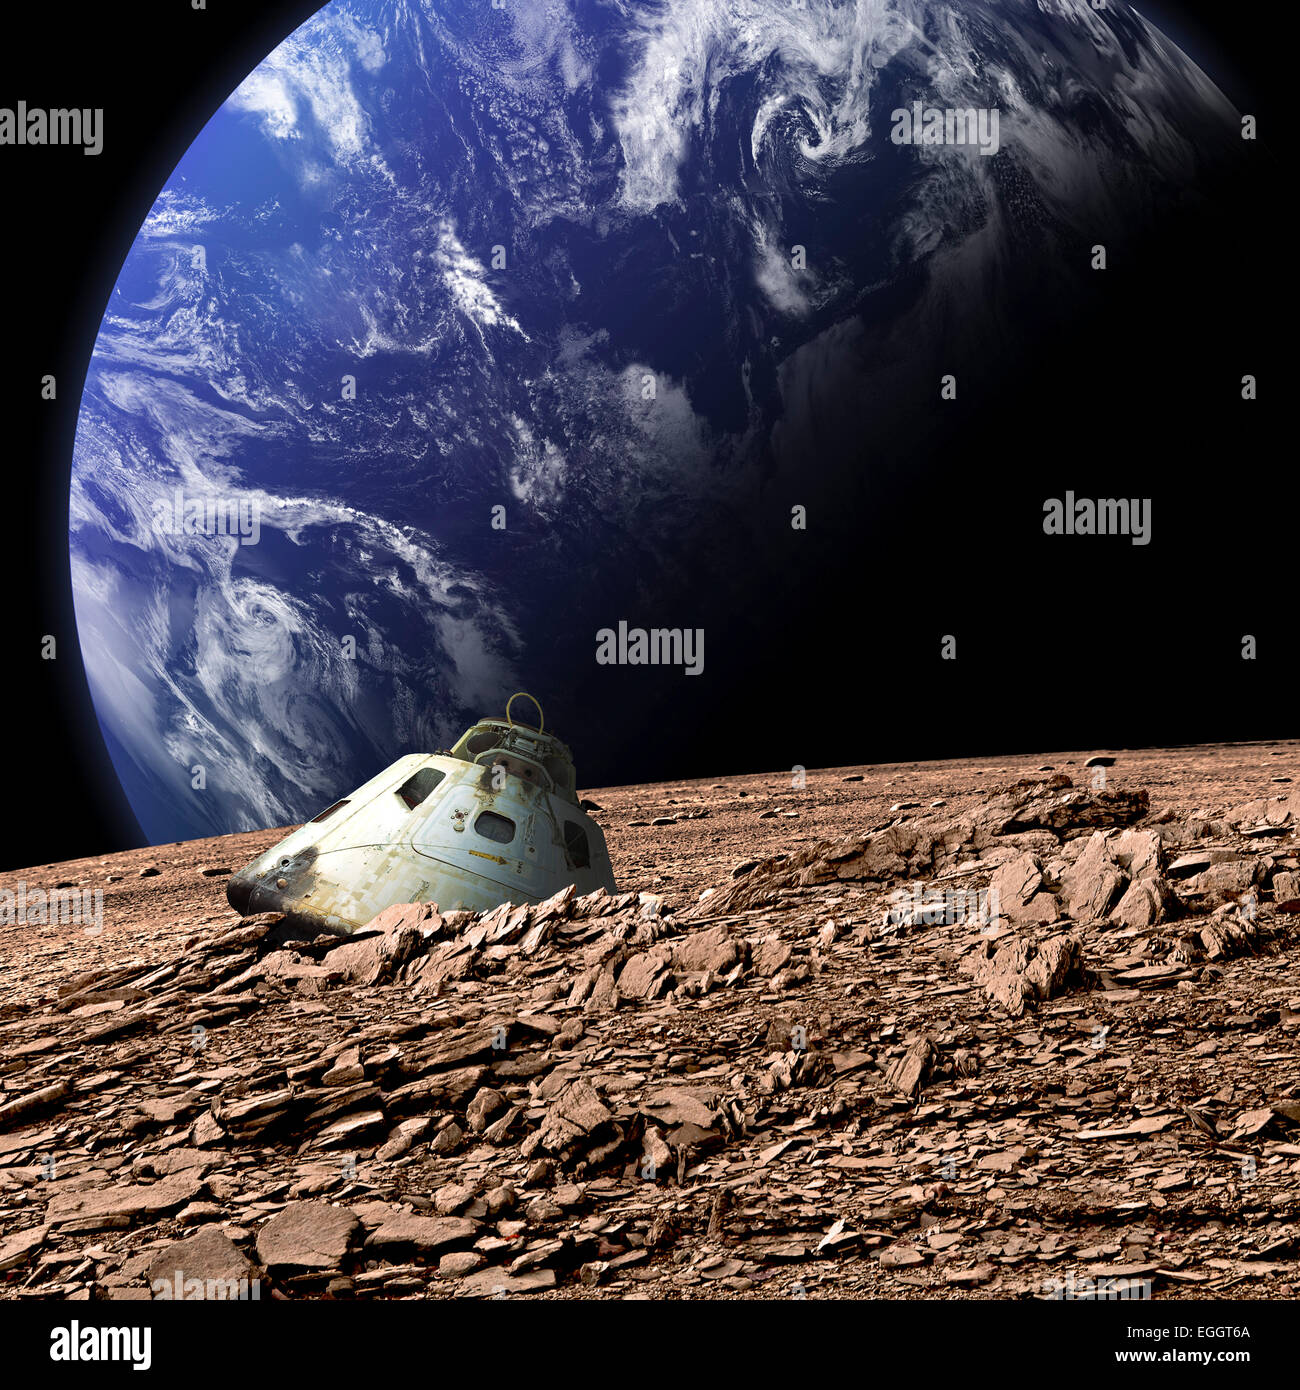 A scorched space capsule lies abandoned on a barren moon. An Earth-like planet covered in water rises in the background. Stock Photo